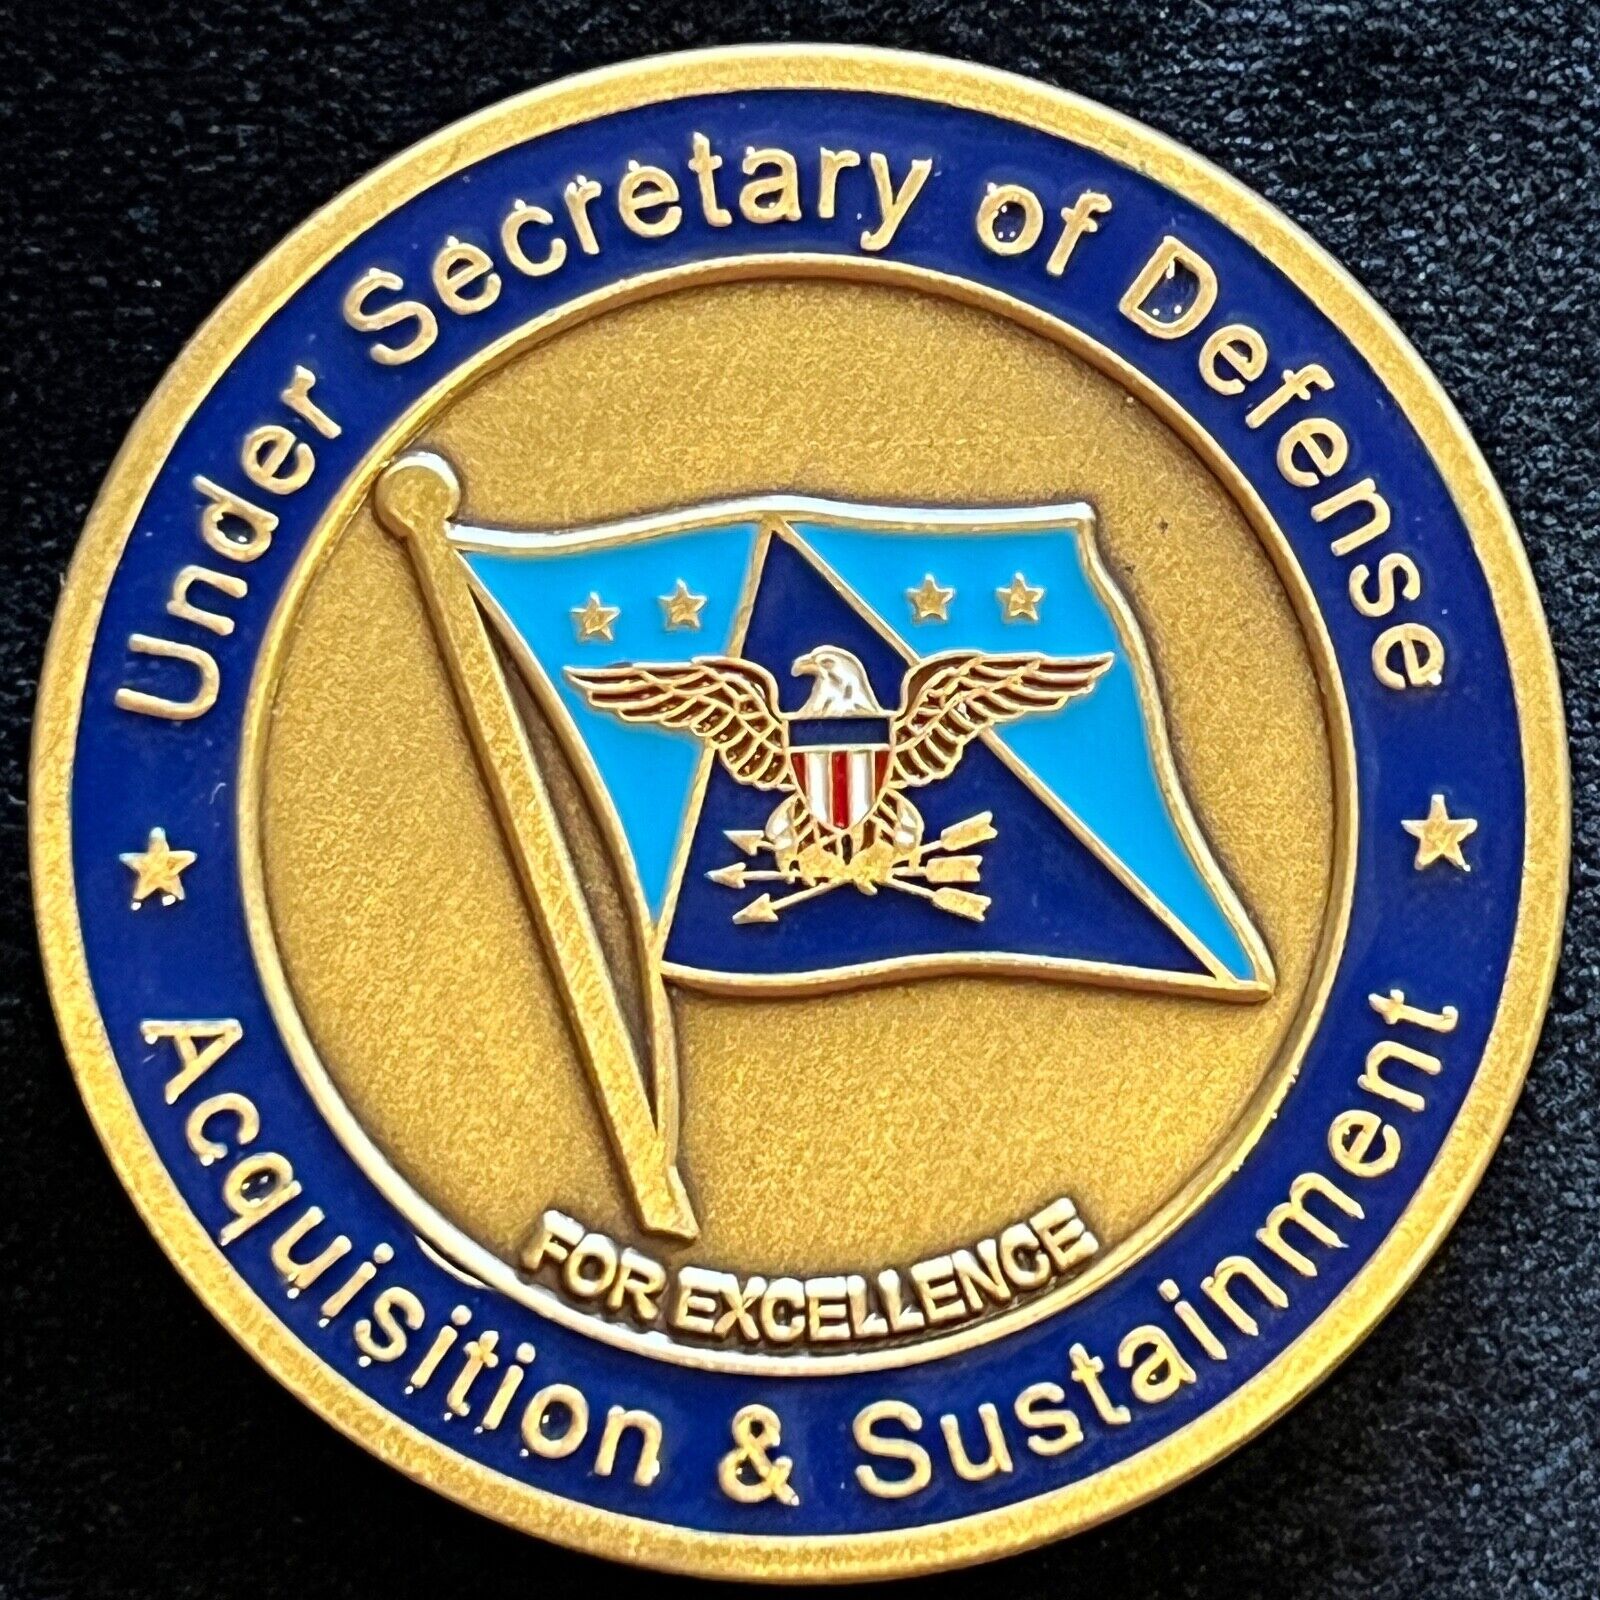 Under Secretary of Defense Acquisition & Sustainment Challenge Coin